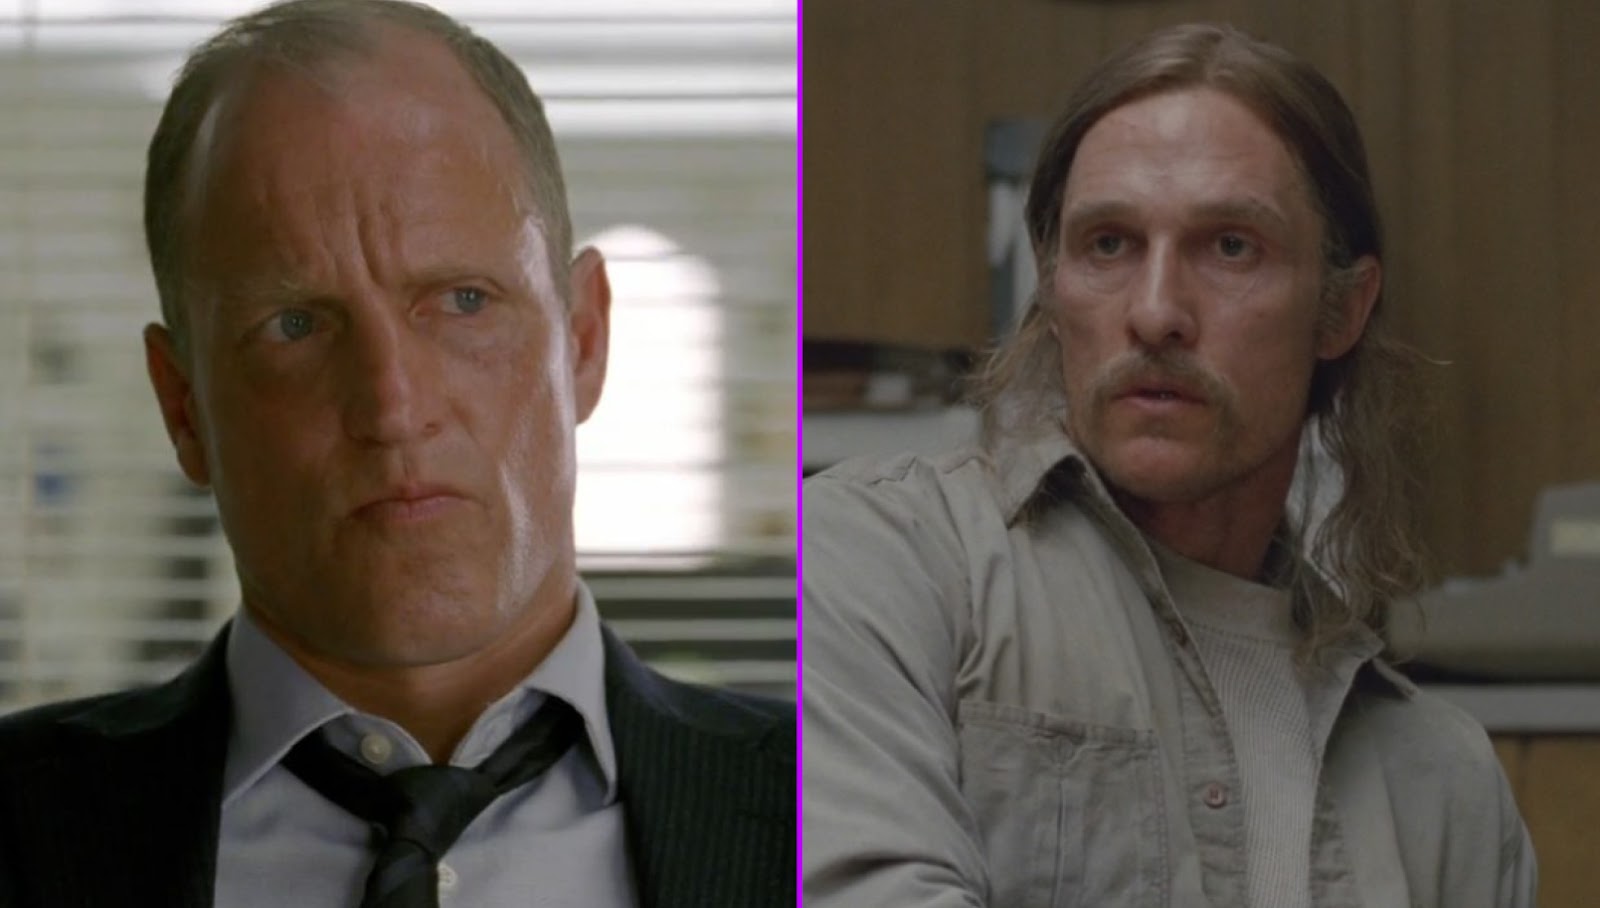 Rust cohle and marty фото 104